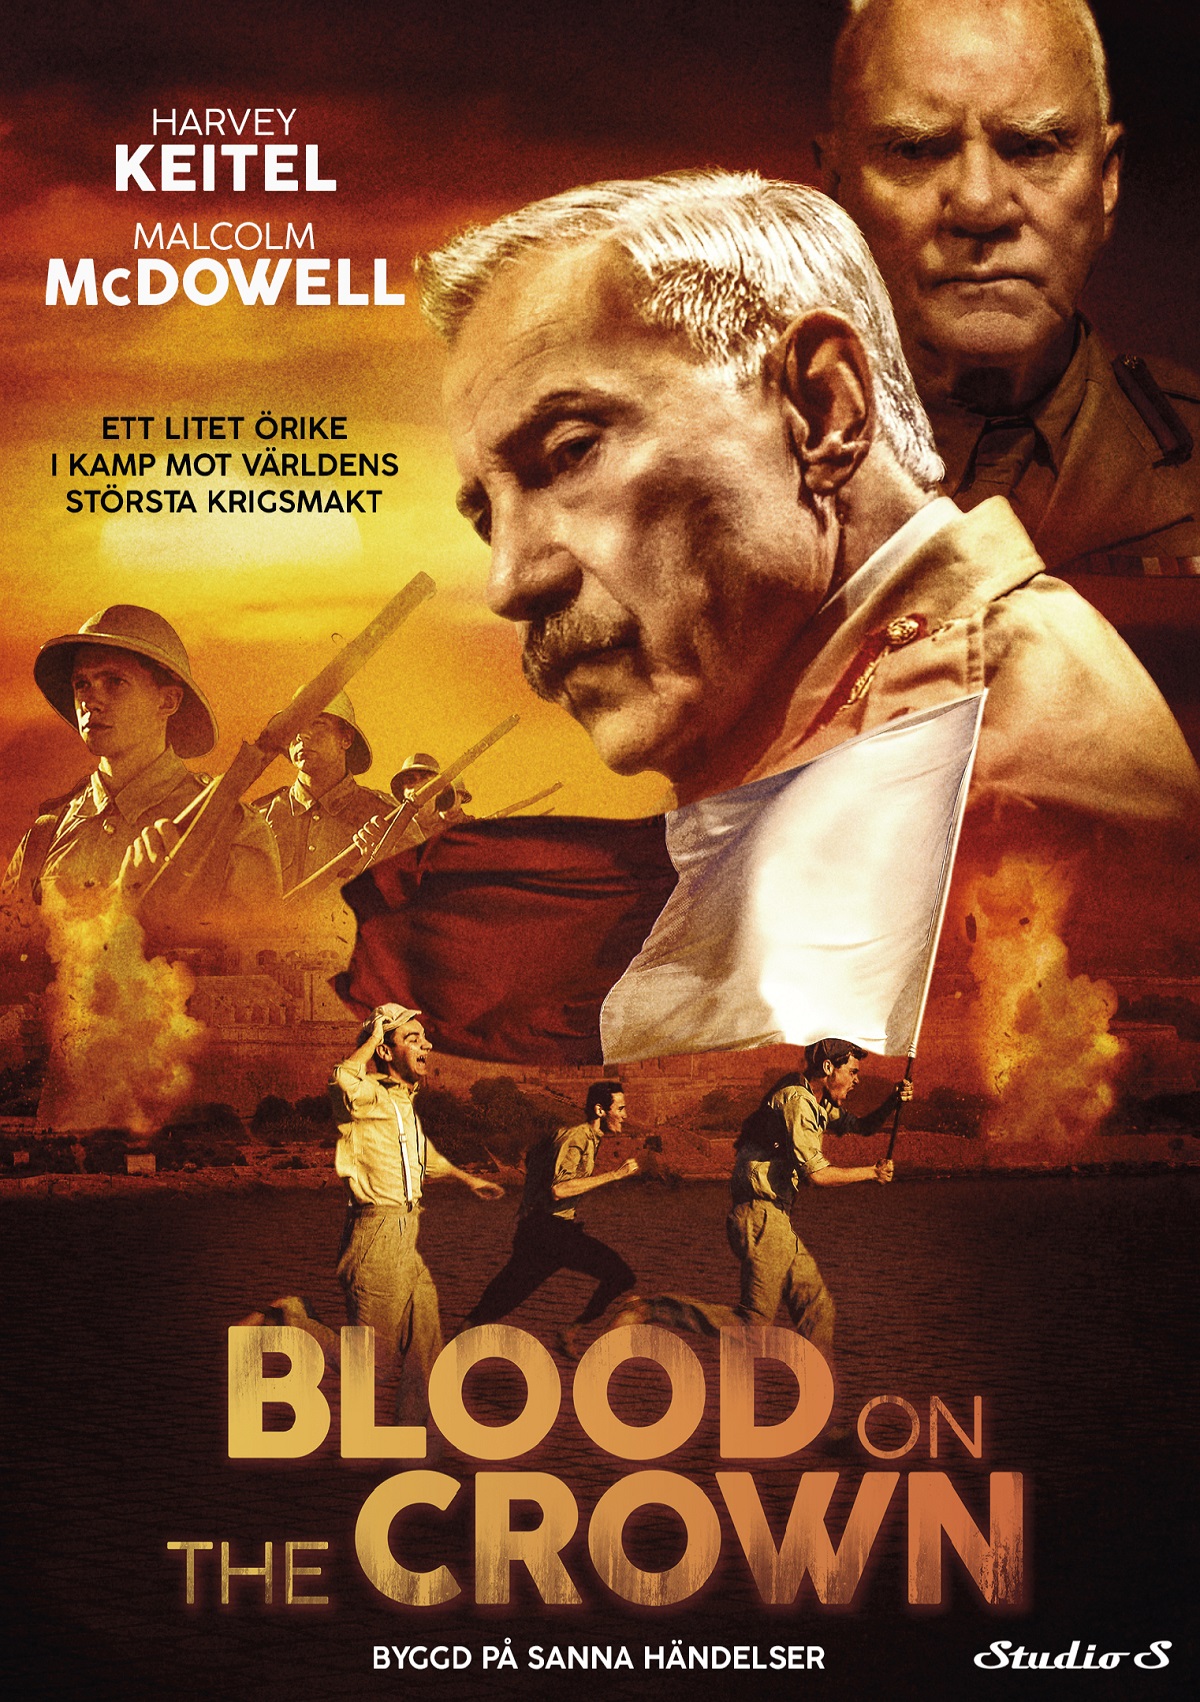 S 1073 BLOOD ON THE CROWN (DVD)